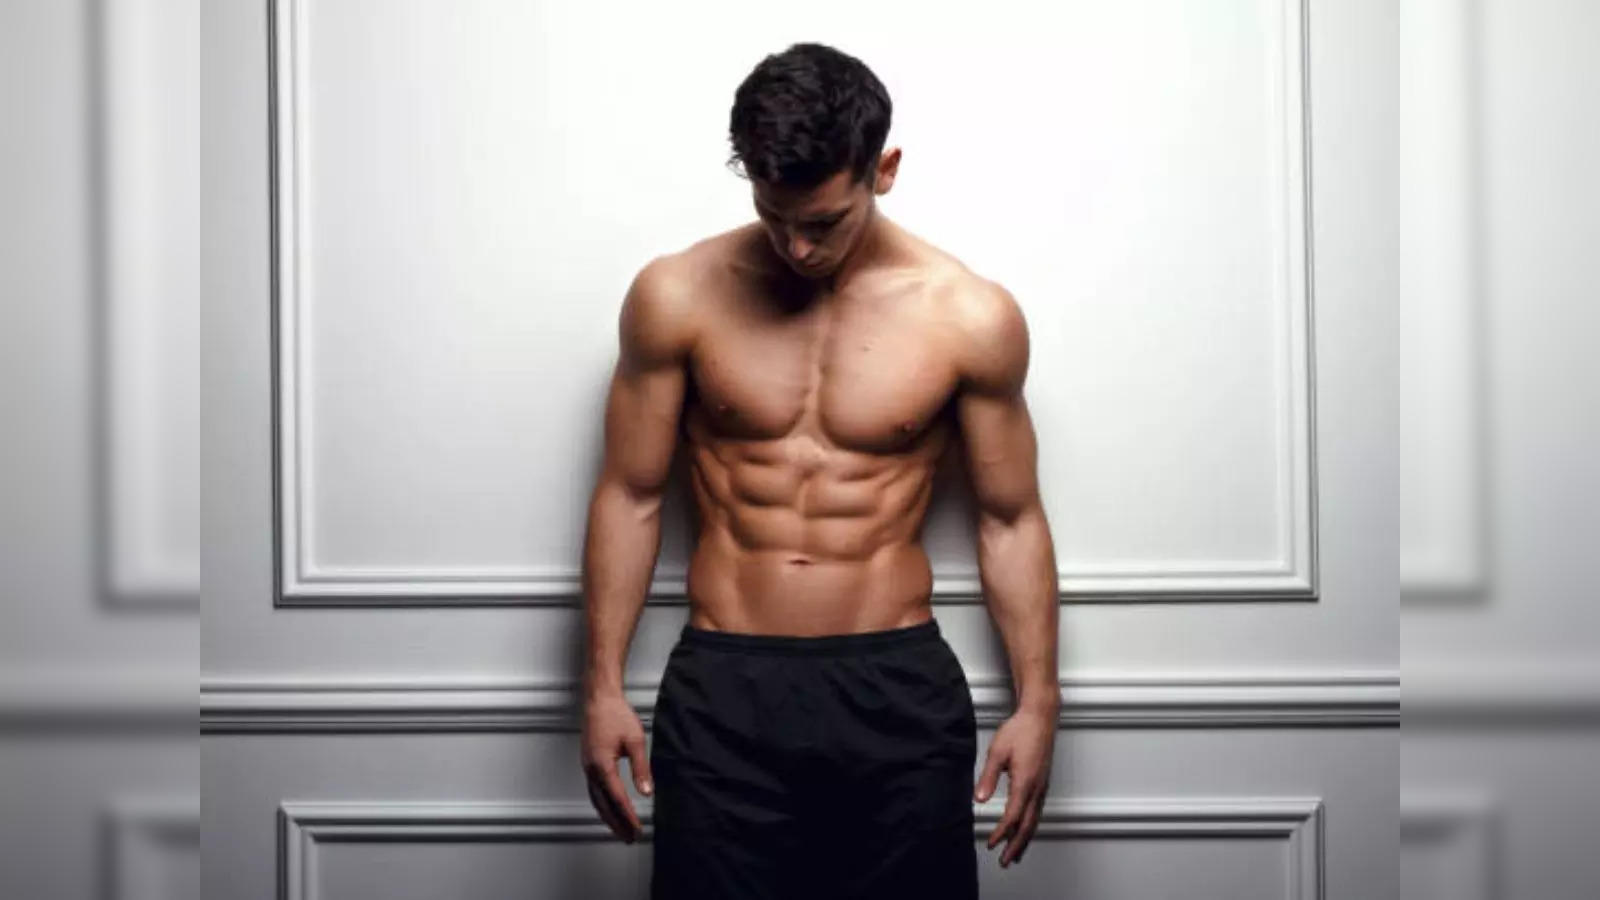 3 essential tips to photograph six pack abs and make them really